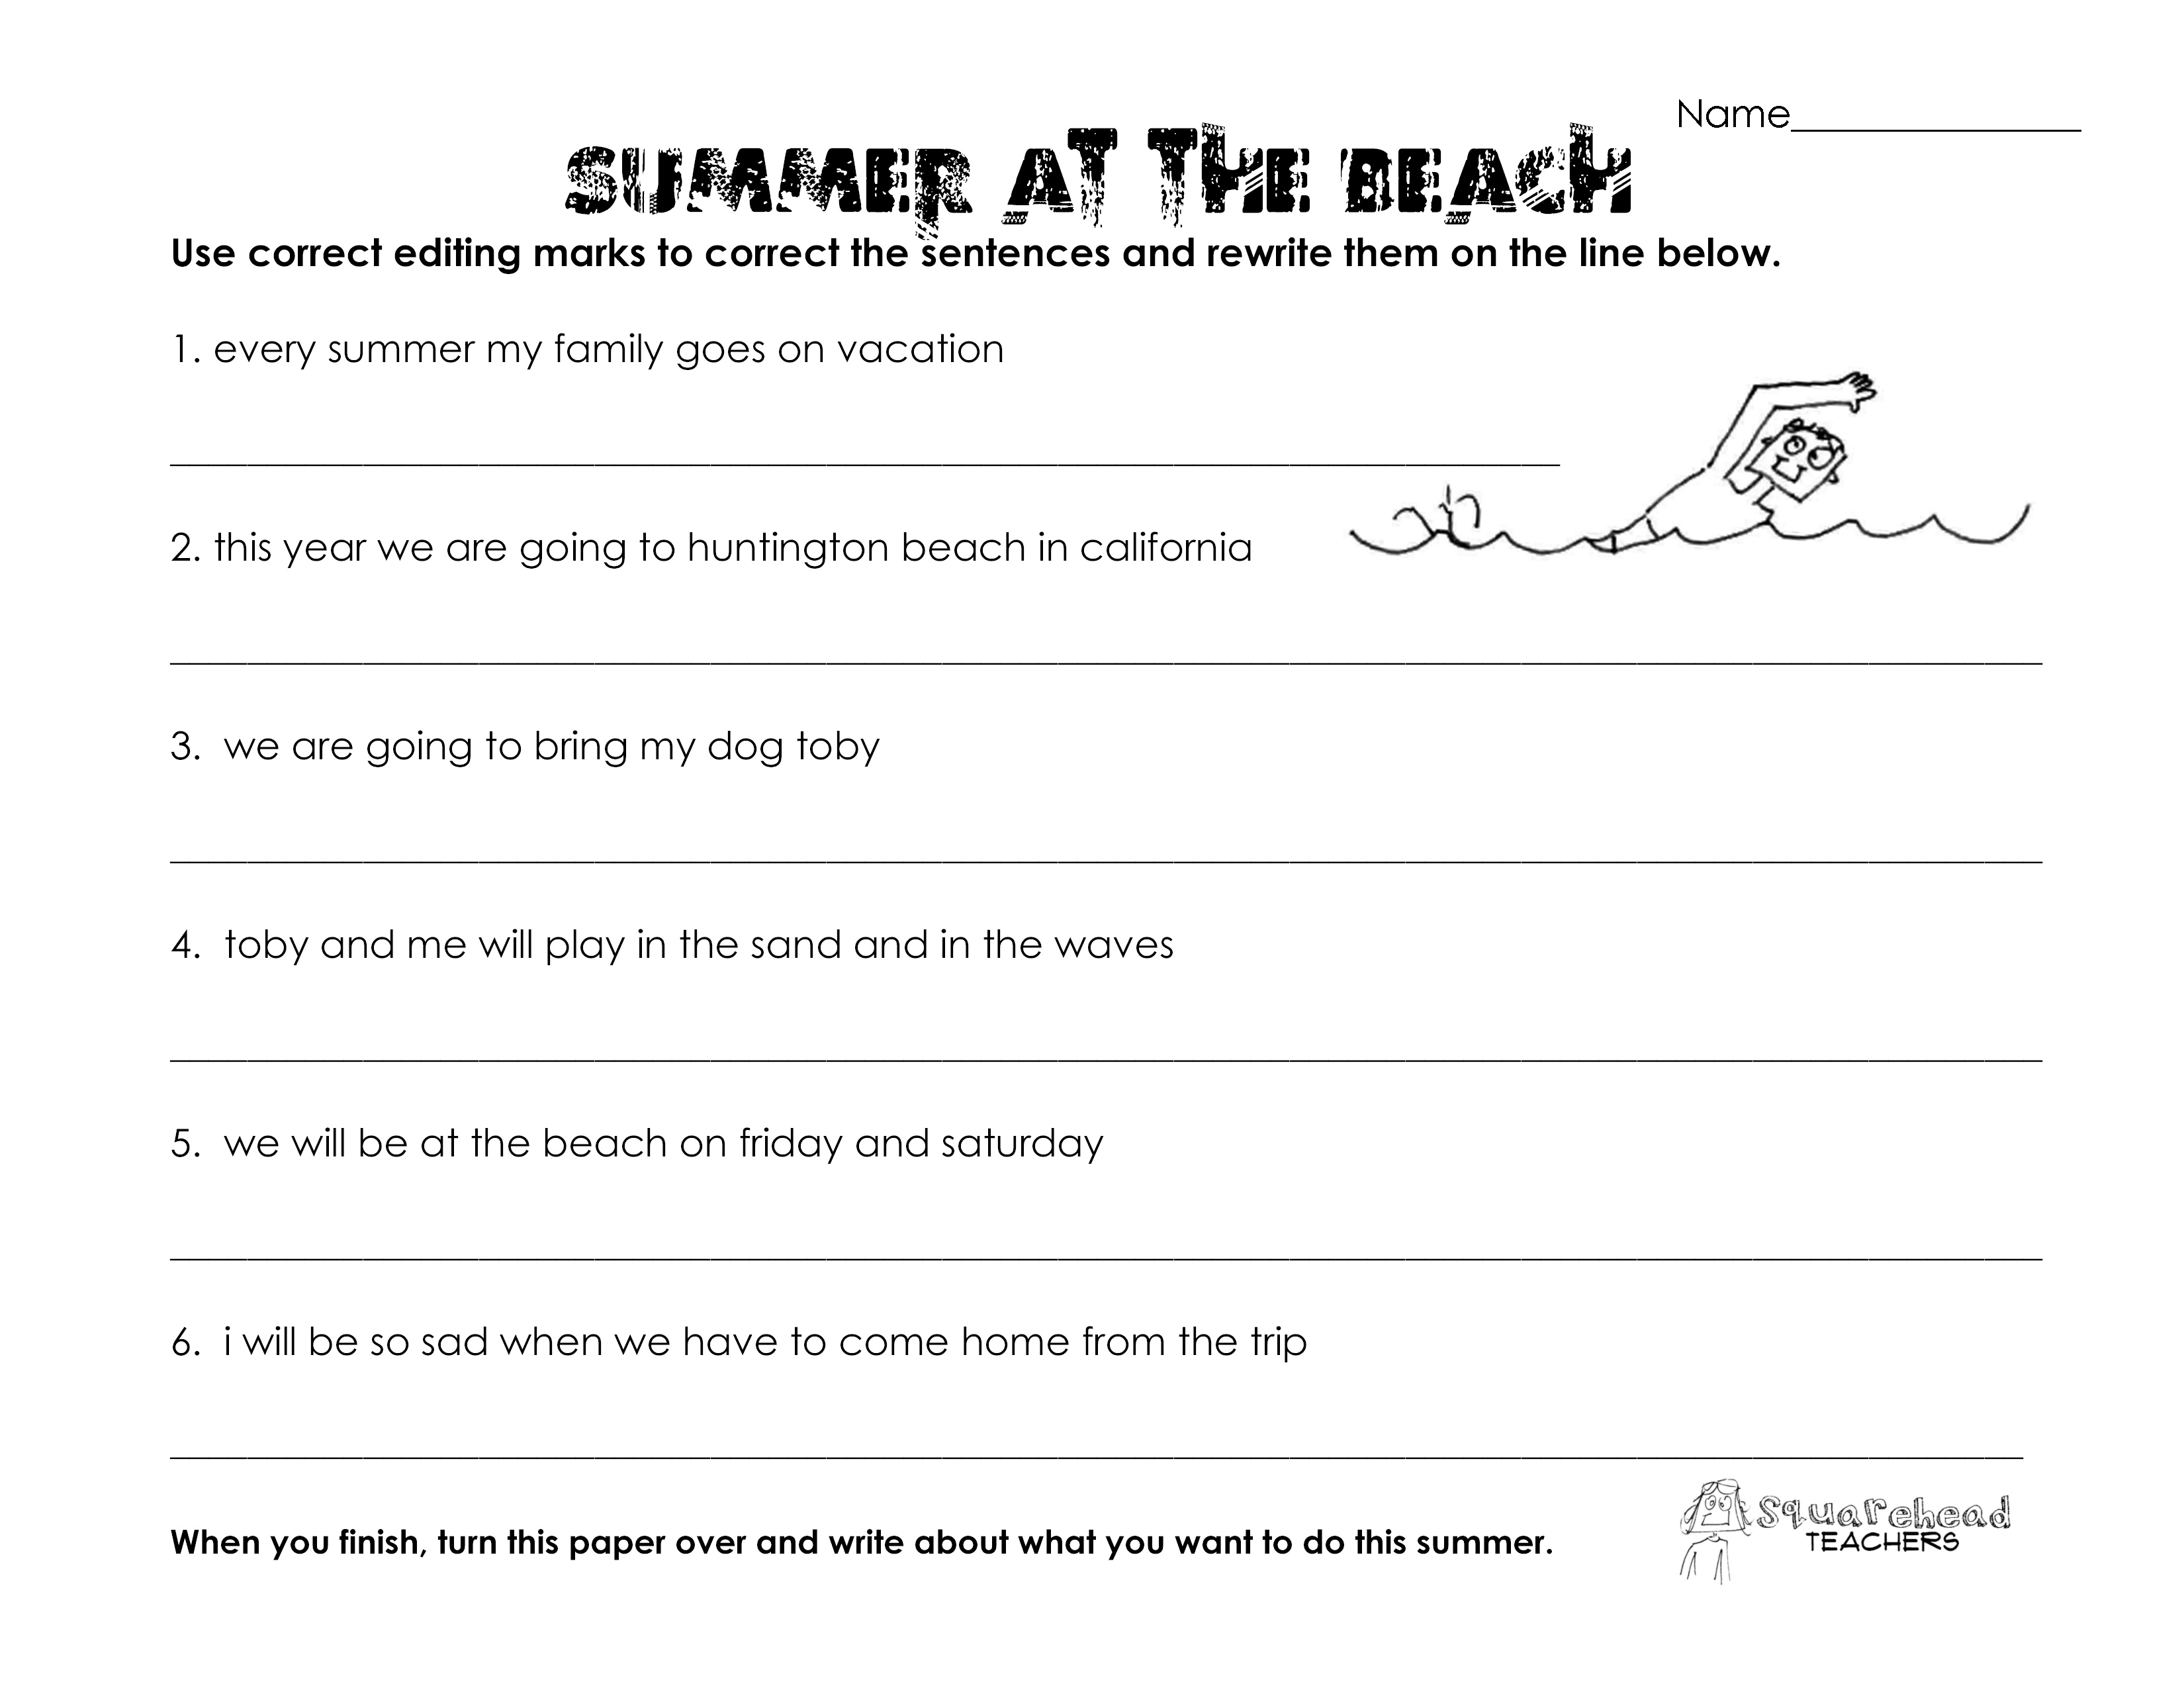 19-best-images-of-worksheets-4th-grade-writing-prompts-9th-grade-writing-prompts-worksheets